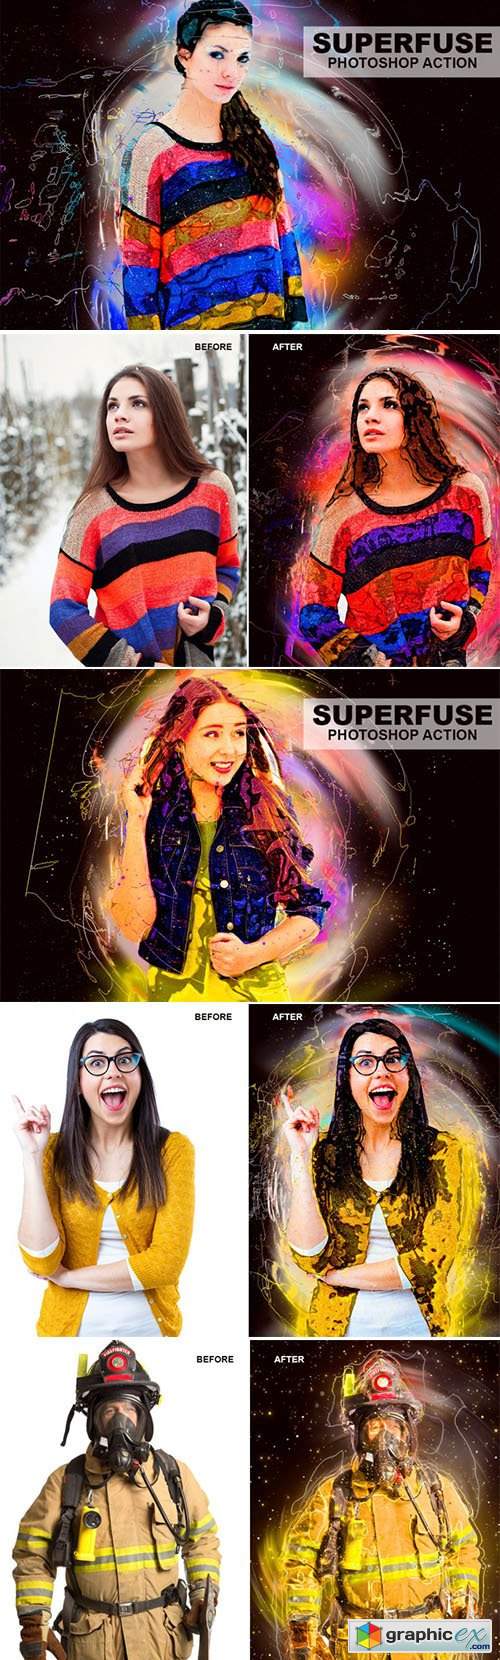 Superfuse Photoshop Action